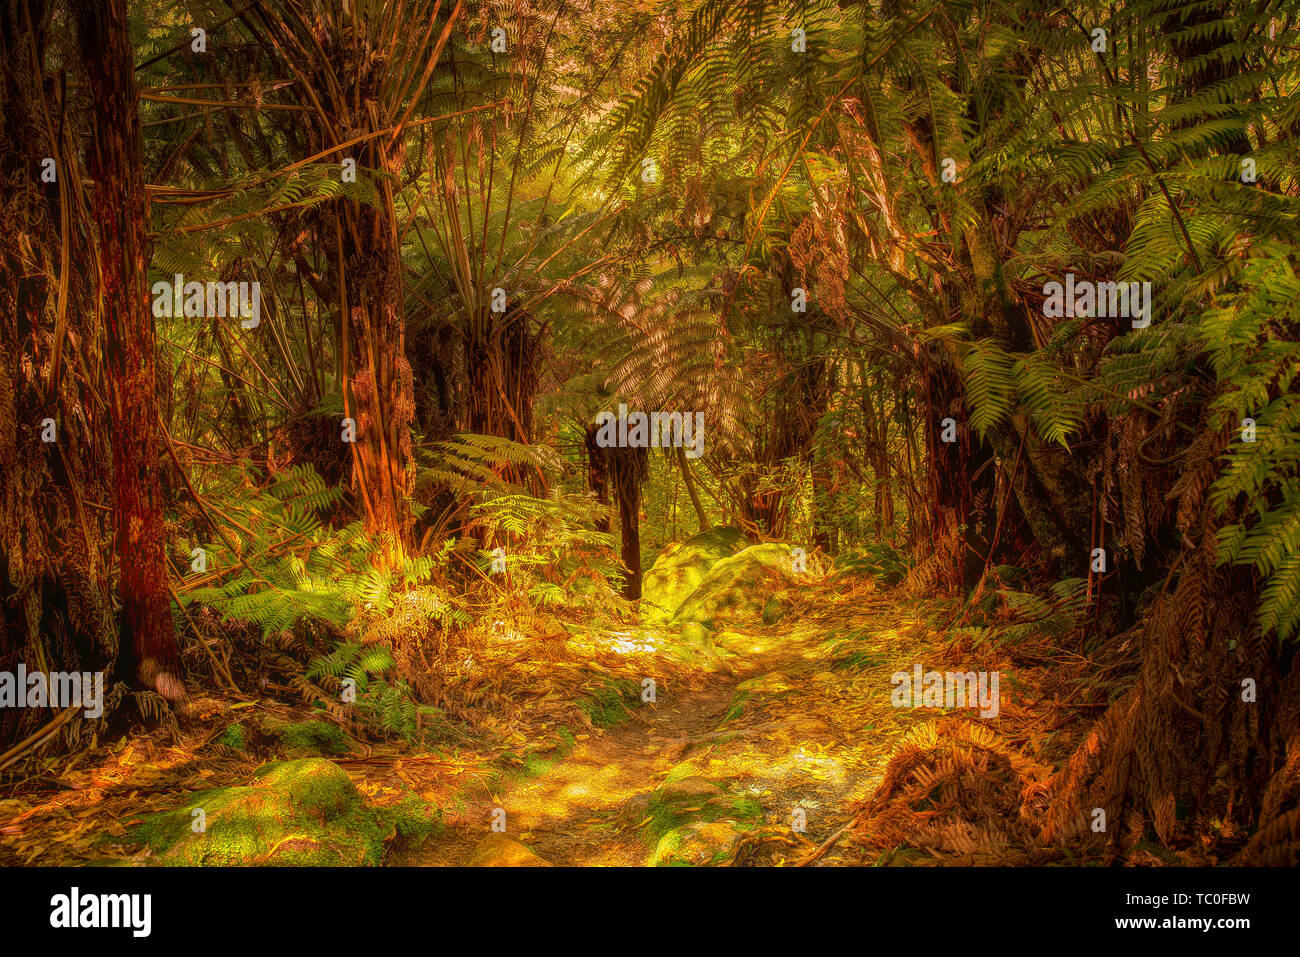 The sun streaming into and lighting up natural NZ native bush Stock Photo